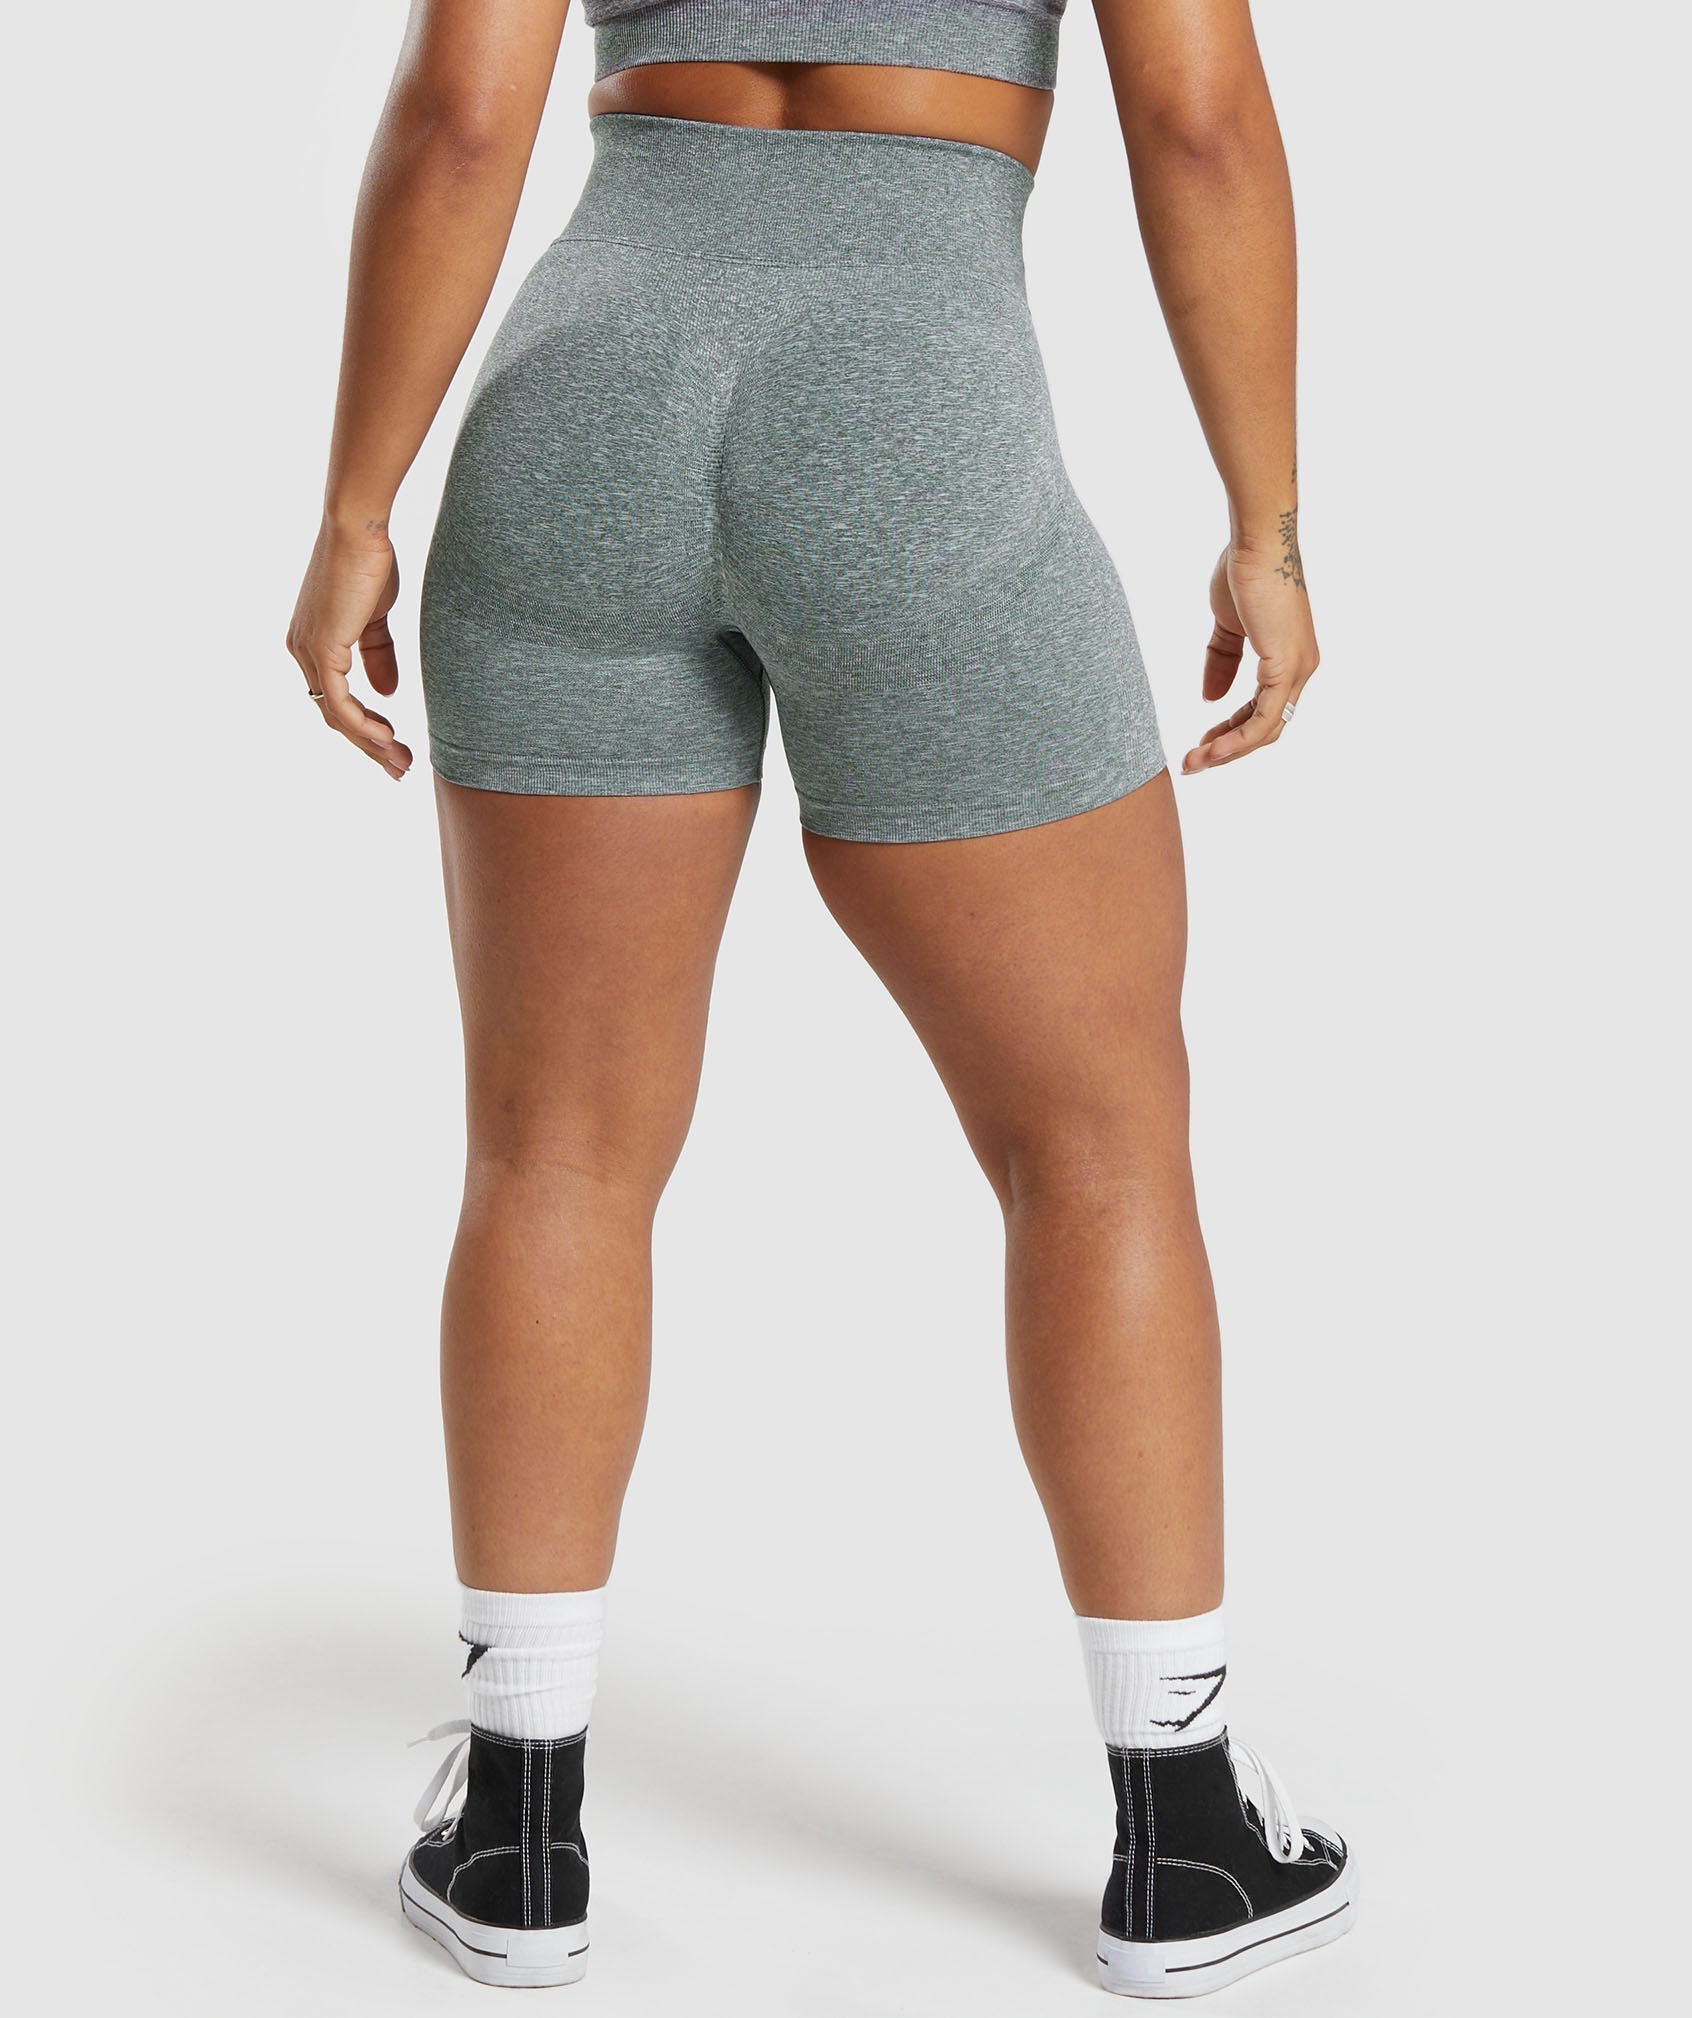 Lift Contour Seamless Shorts in Slate Teal/White Marl - view 5